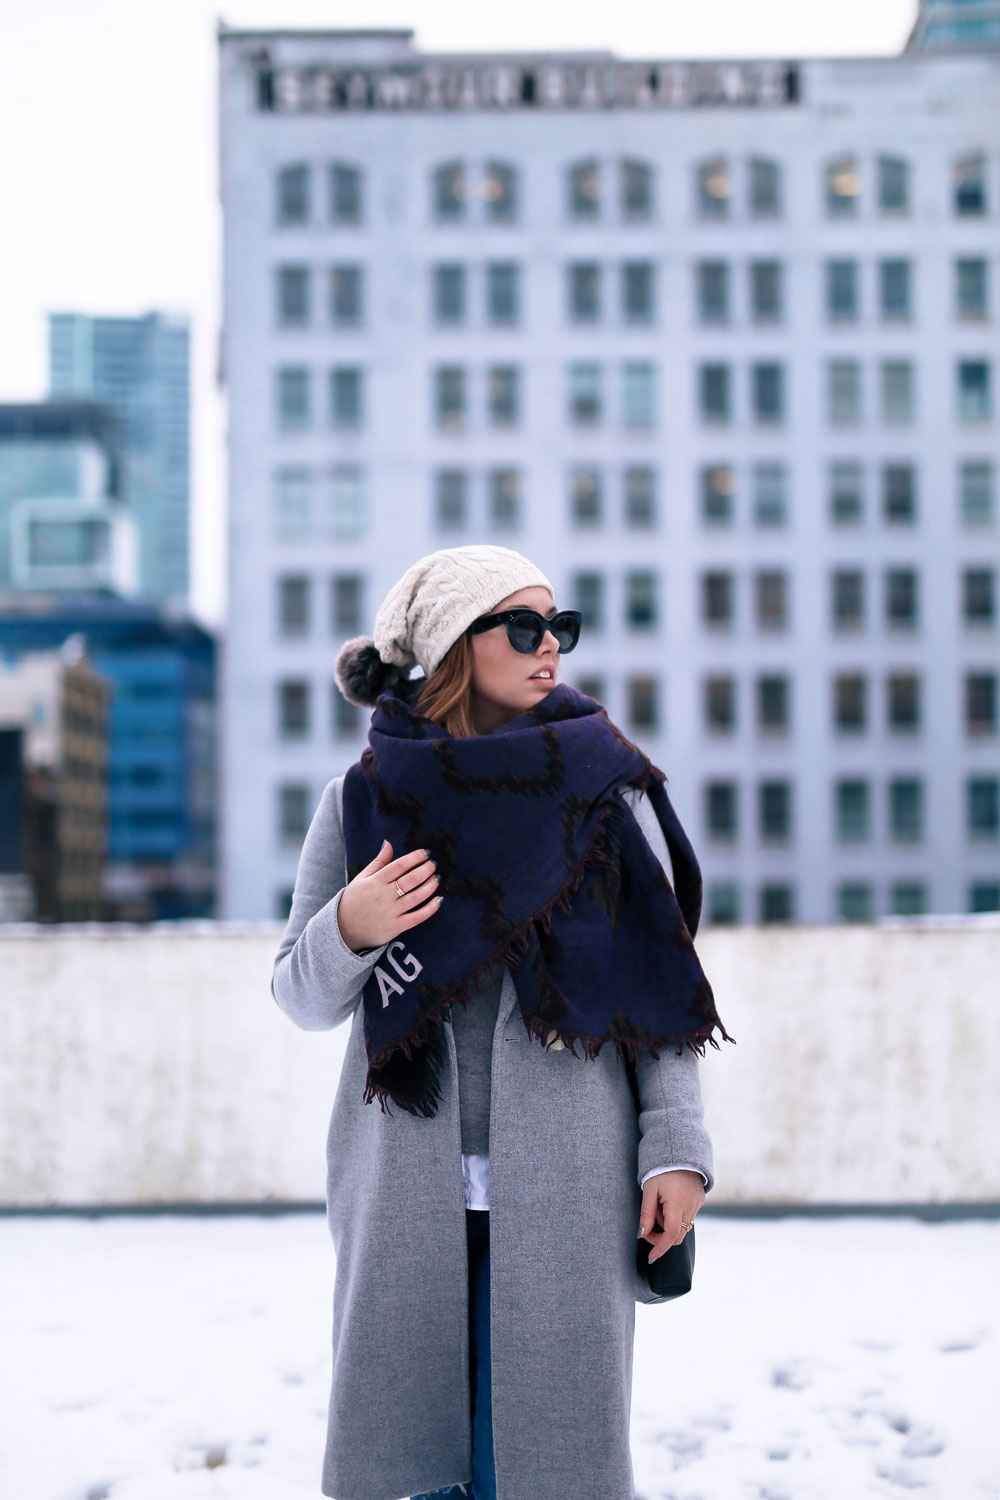 Cute outfit ideas in the snow - Aritzia blanket scarf, Aritzia grey wool coat, Tilley beanie, Mavi skinny jeans, Urban Outfitters ankle boots, Celine Caty sunglasses, layered oxford shirt